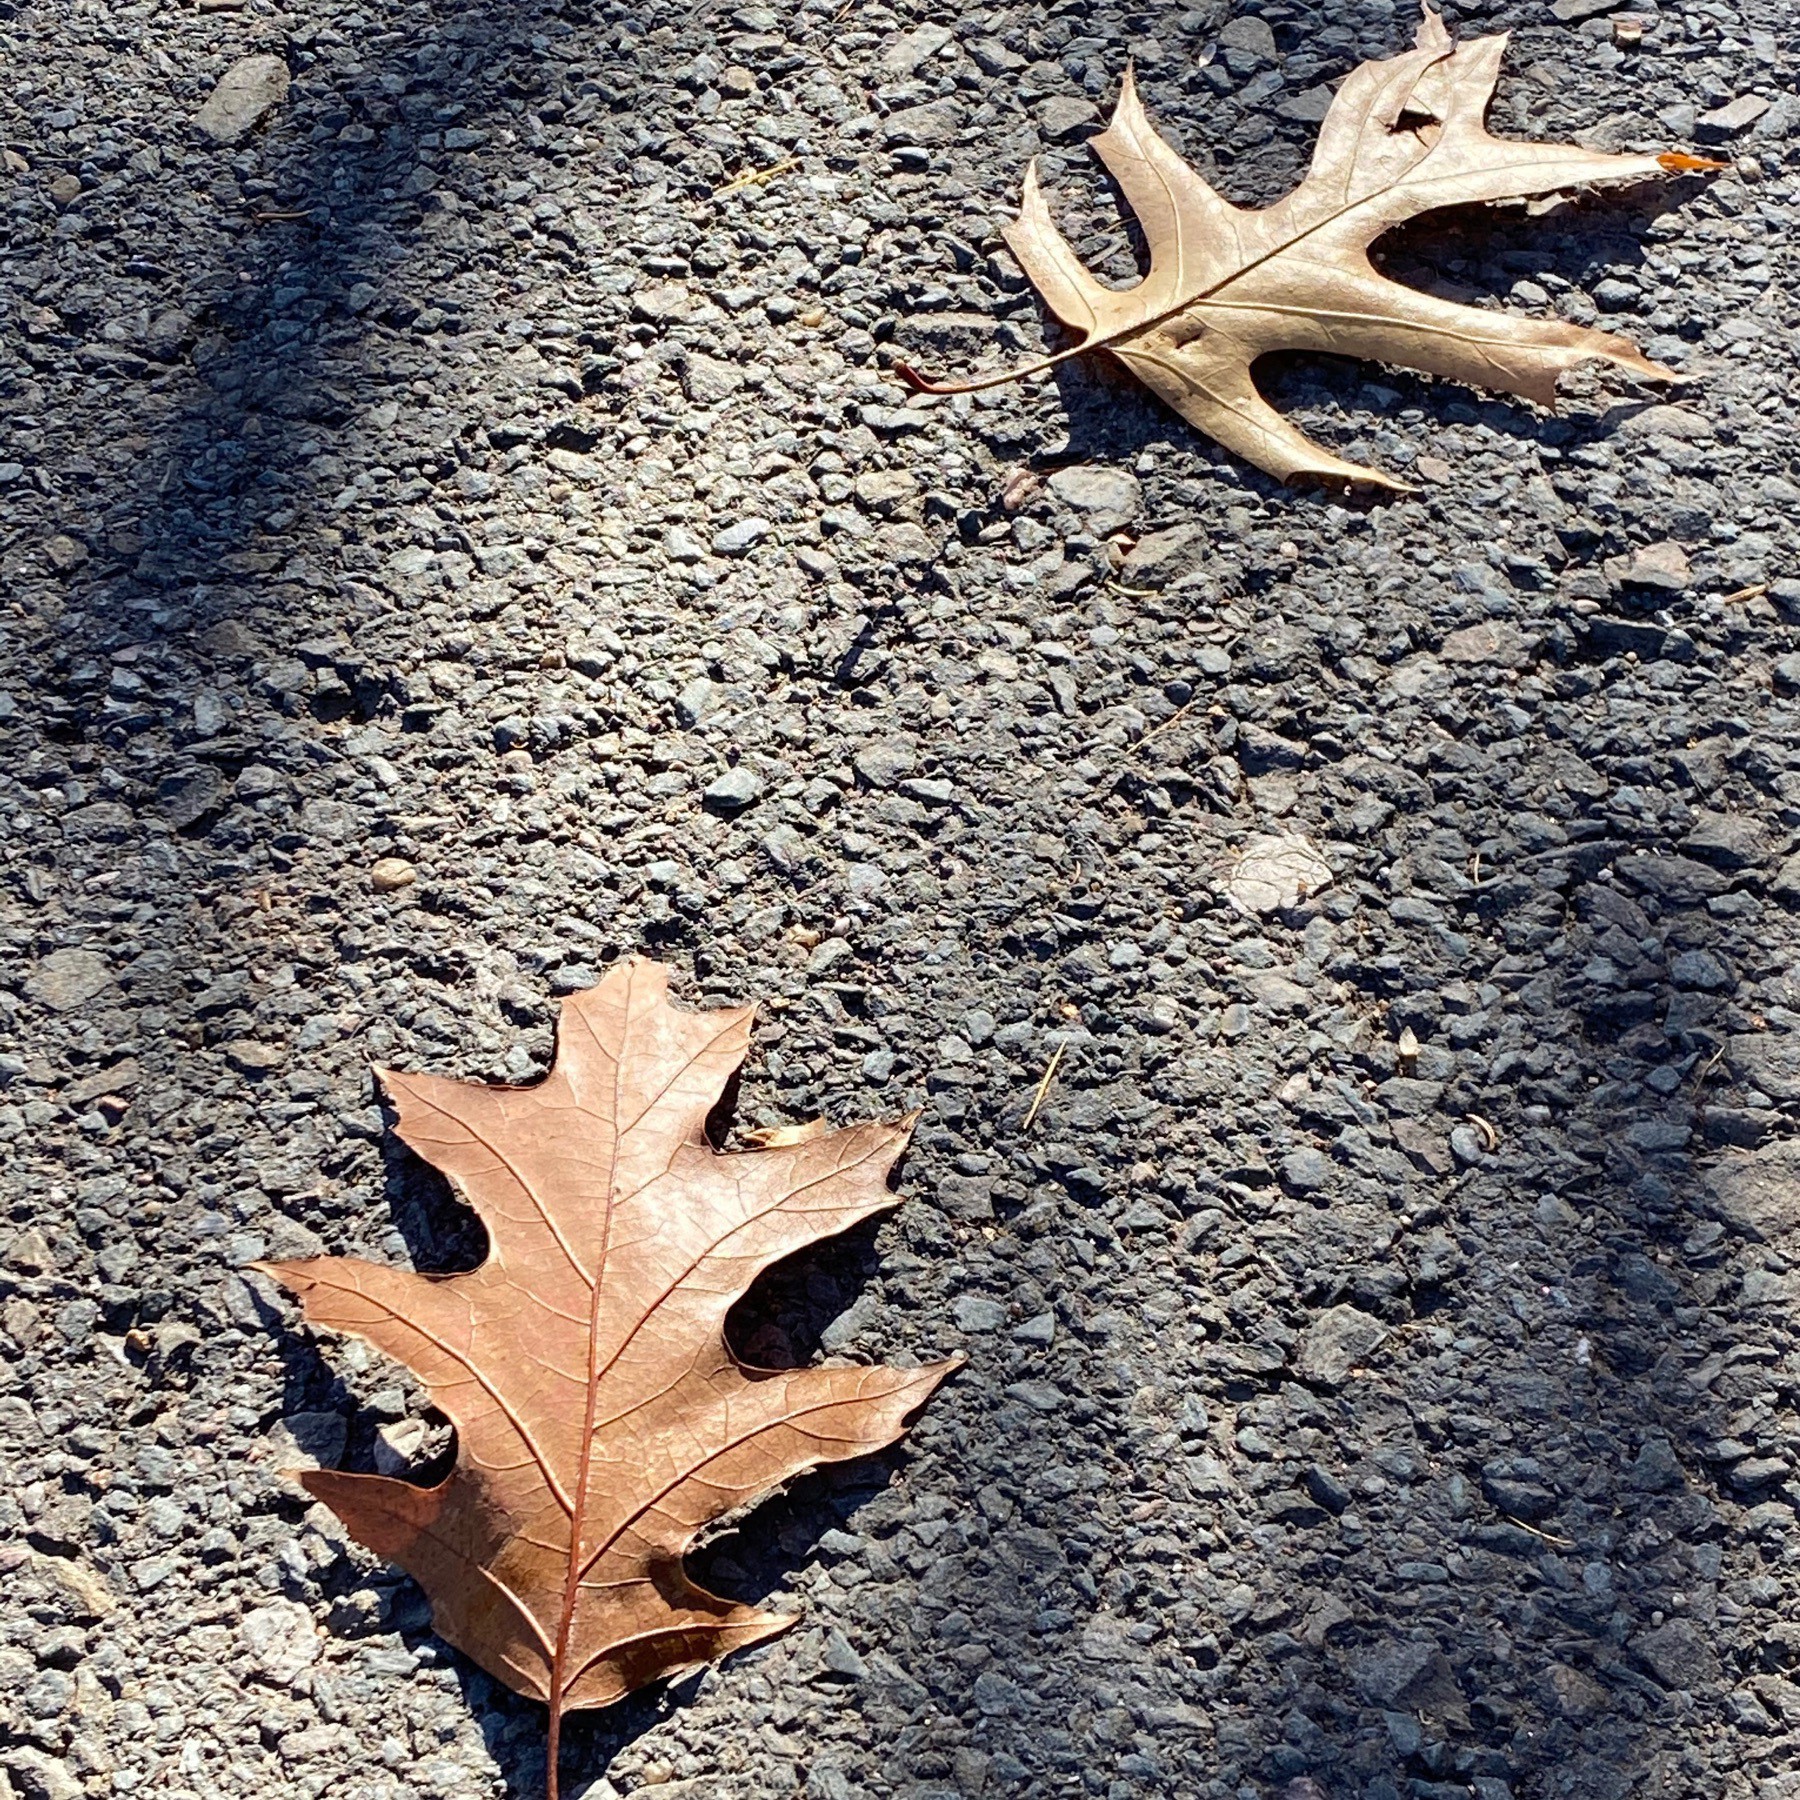 Two leaves on pavement.